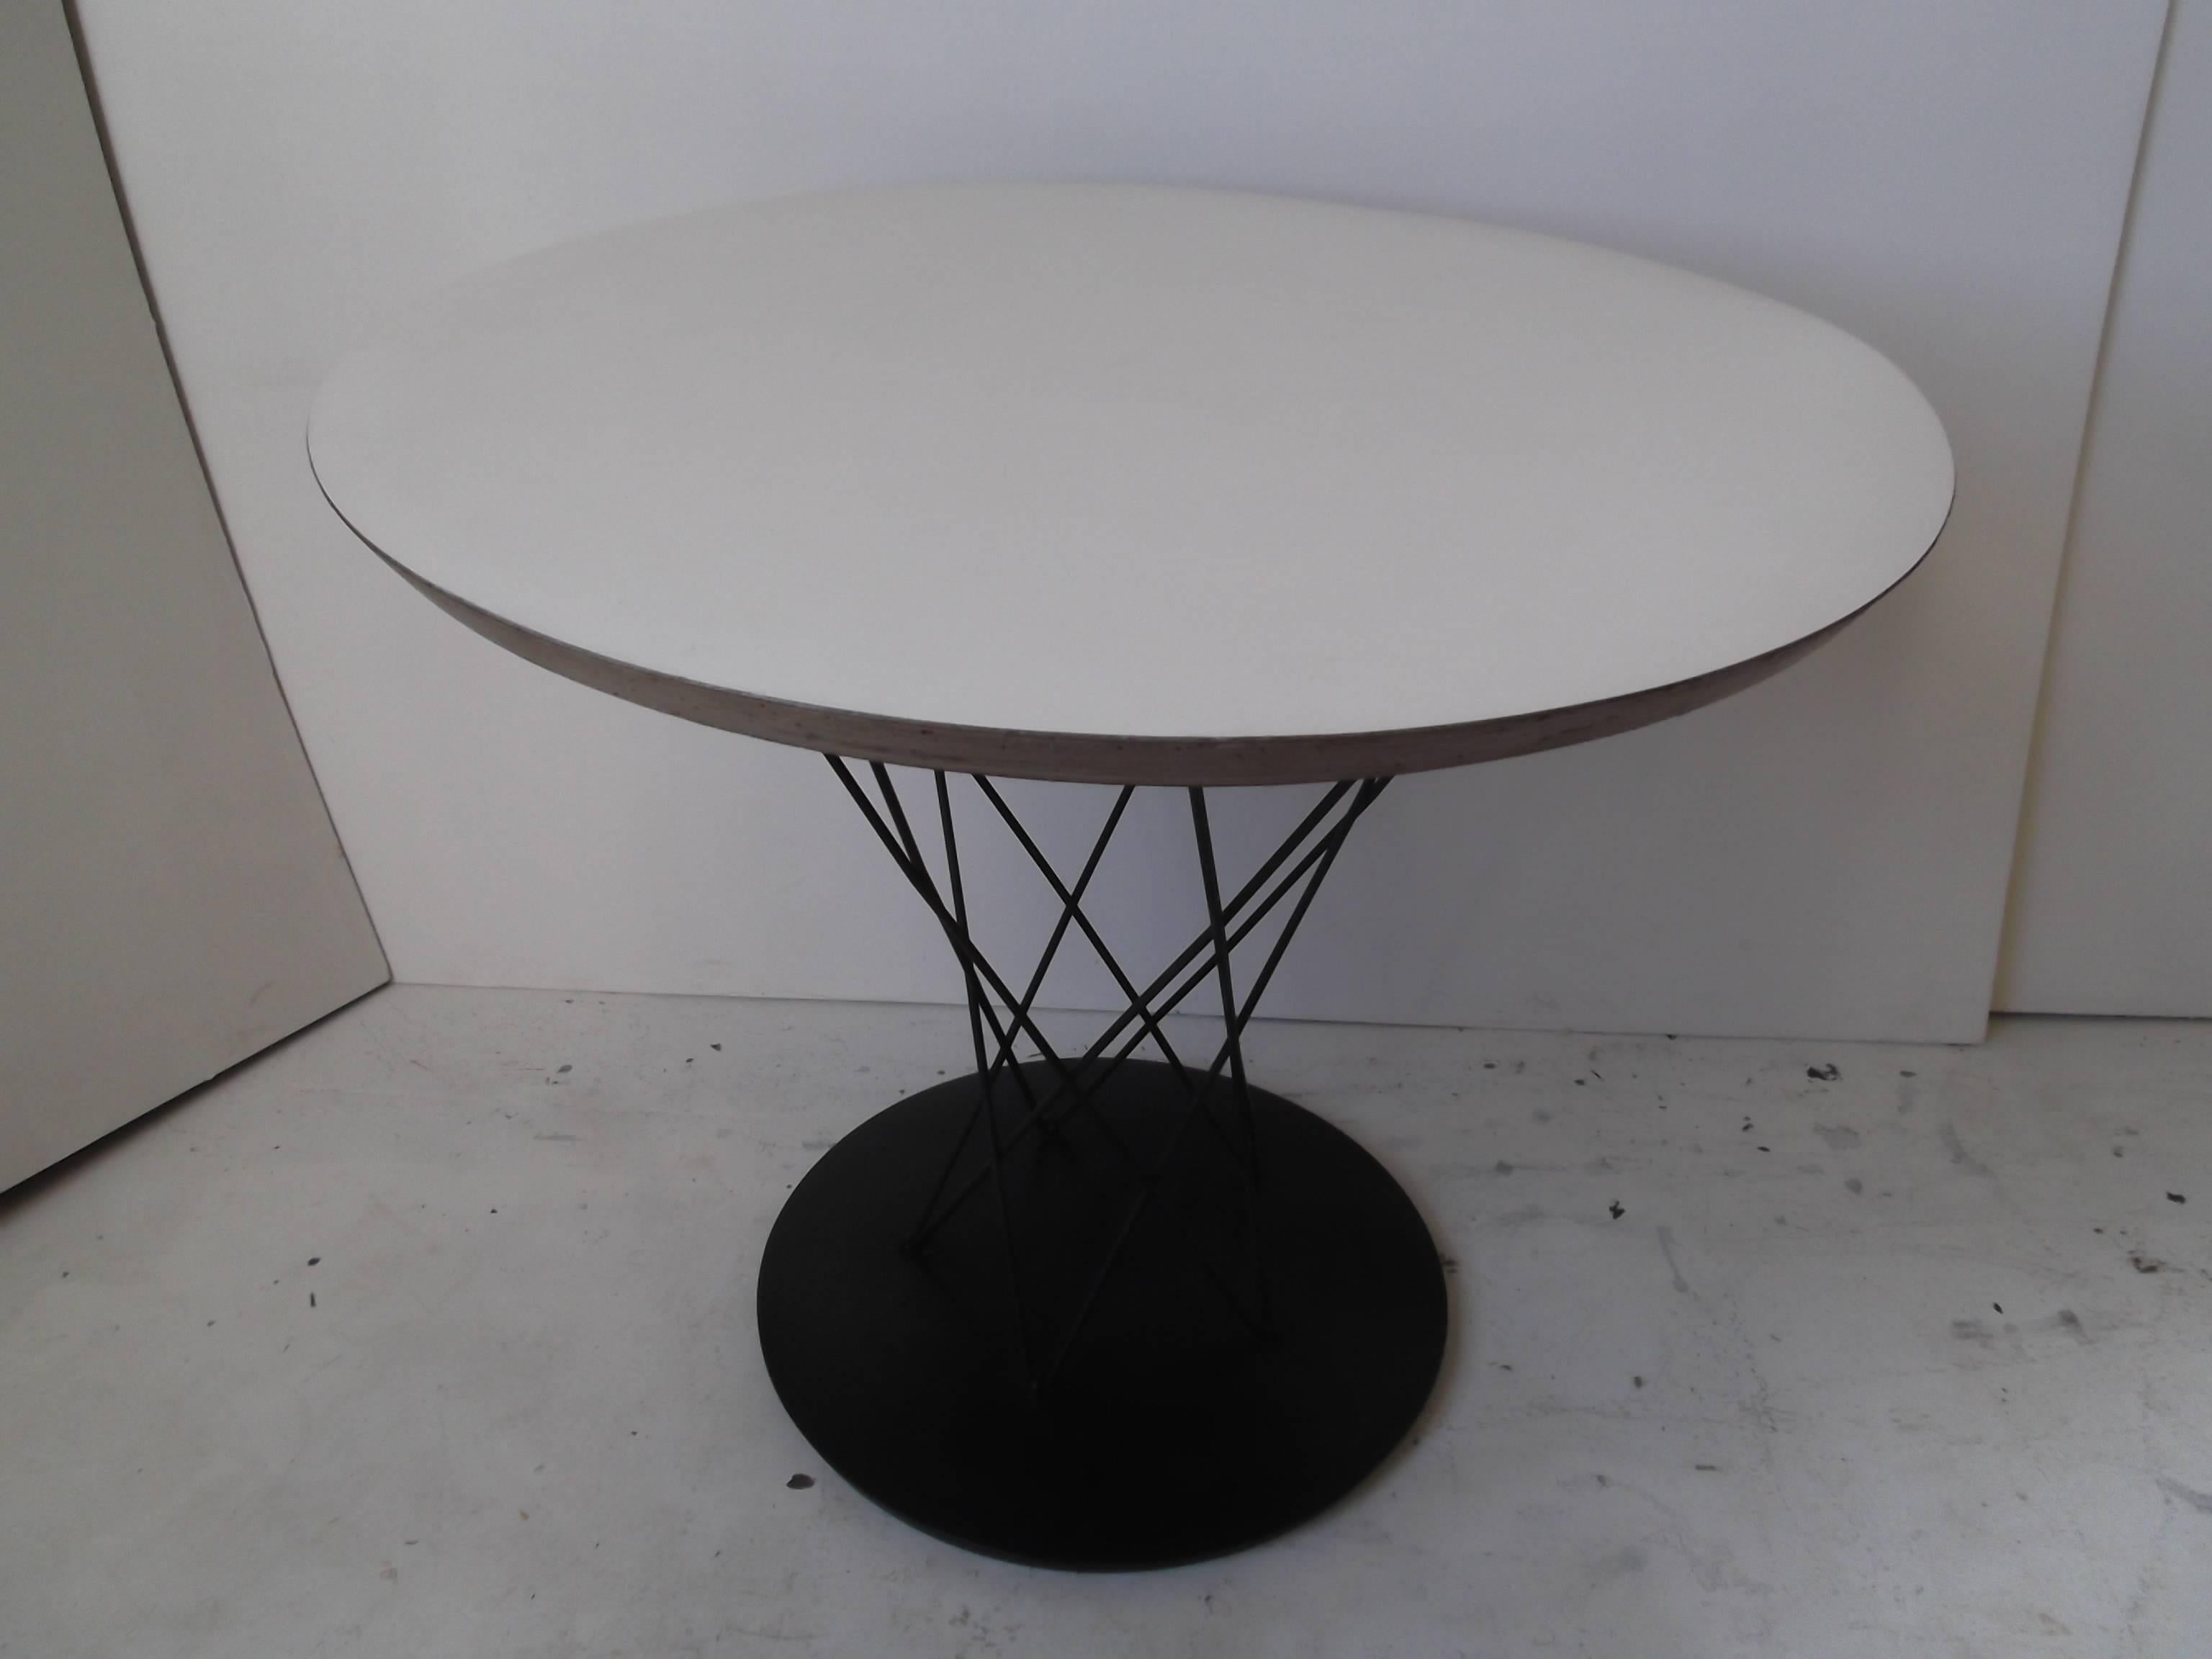 This is a 1950s example of a Child's Cyclone table by Noguchi for Knoll. It is one of the great Mid-Century Modern designs of the 20th century. It was designed as a child's table and looks great with Baby Bertoia chairs, but is generally used as an